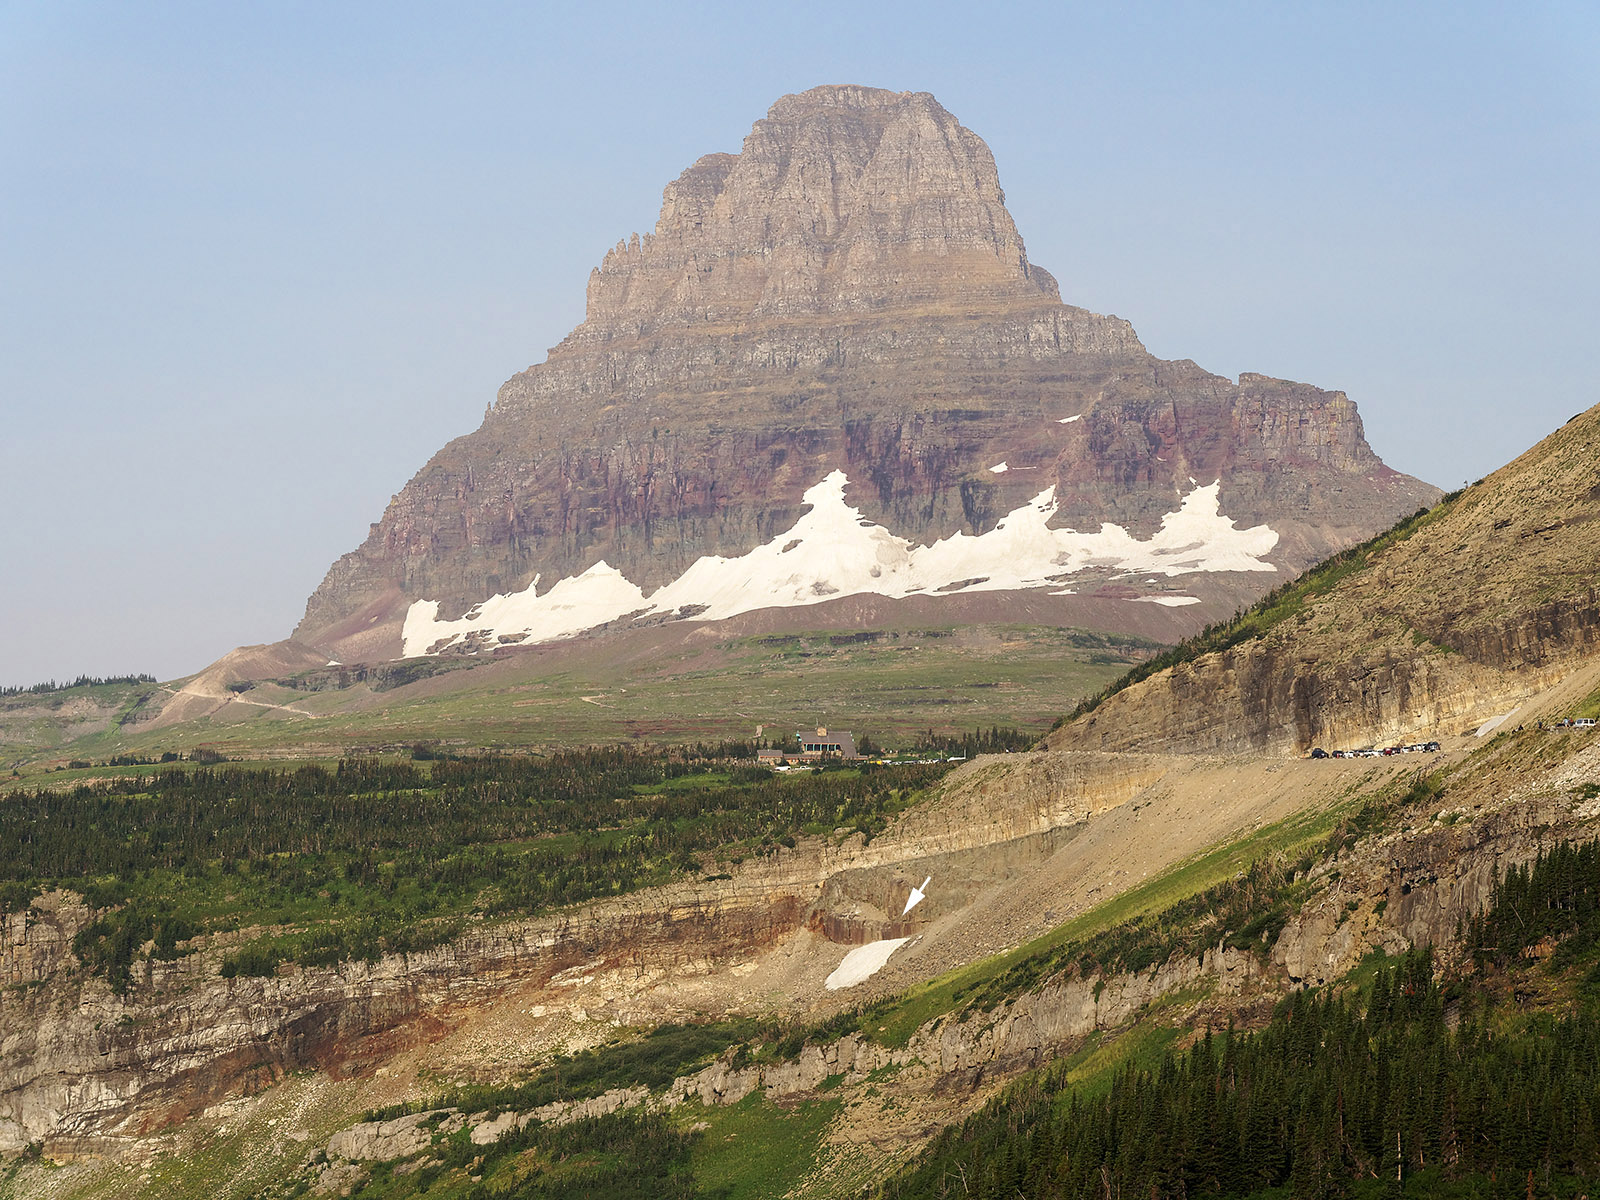 Clements Mountain at the top of Logan Pass is composed of upper Shepard formation and darker lower Snowslip formation.  An igneous sill (diabase at arrow) intrudes into the Helena formation.